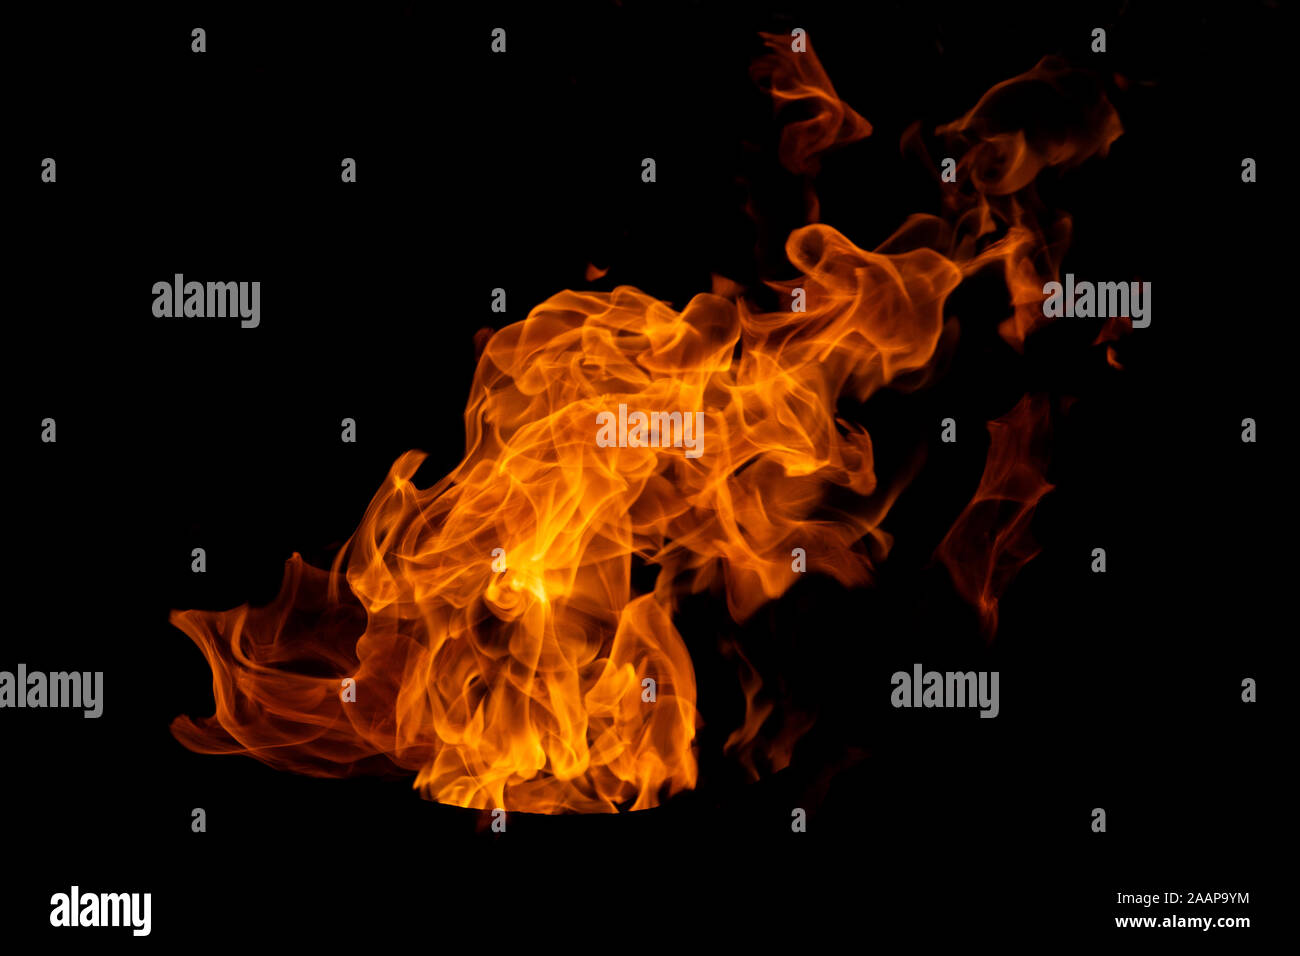 Isolated flame on a black background Stock Photo